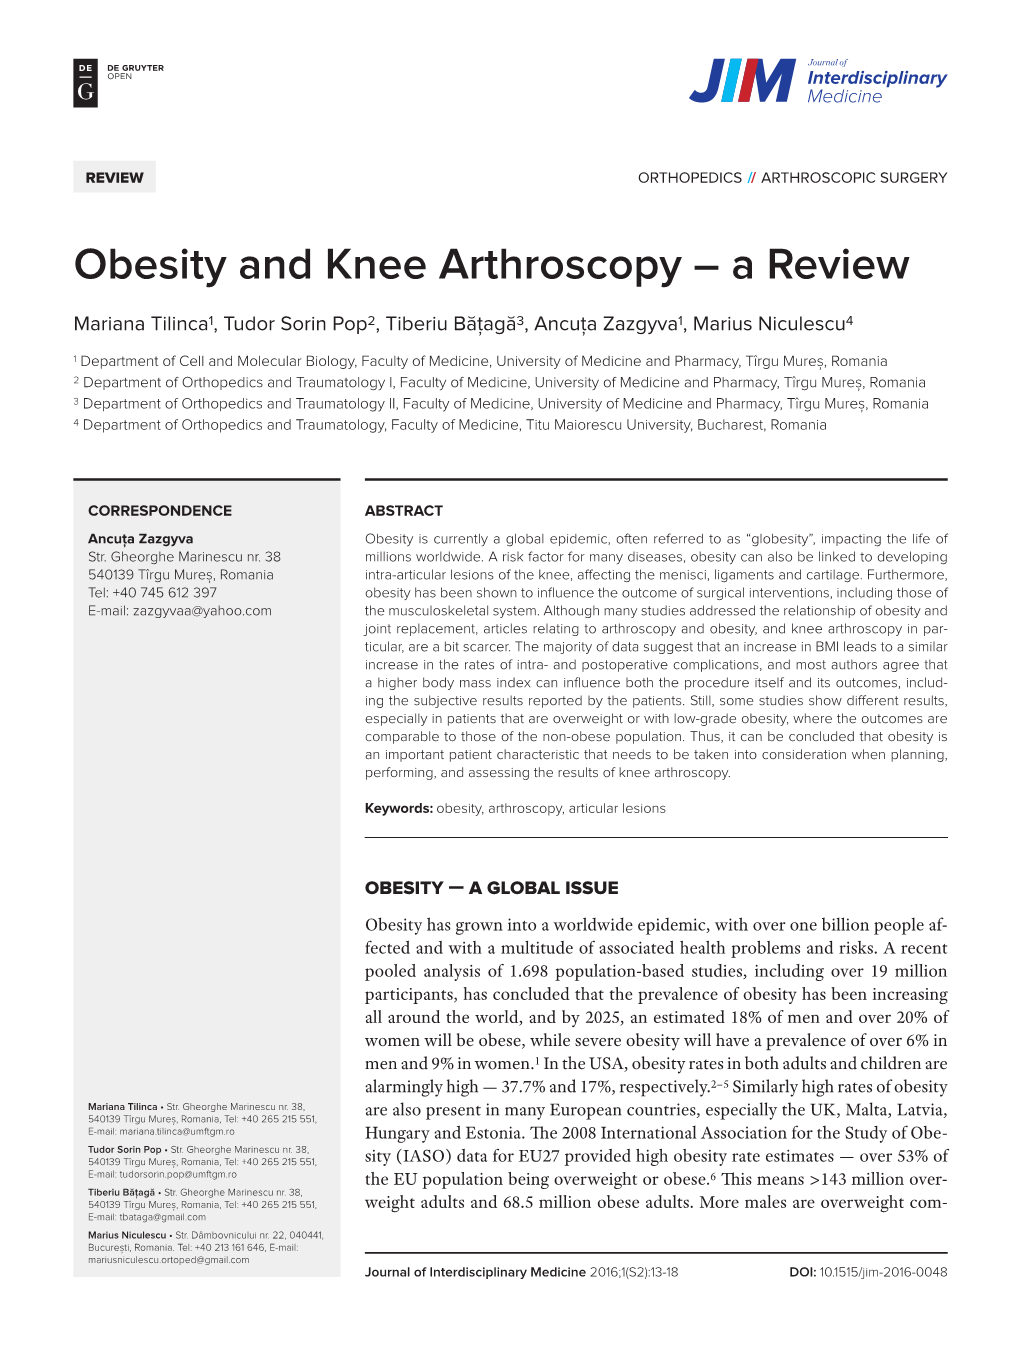 Obesity and Knee Arthroscopy – a Review